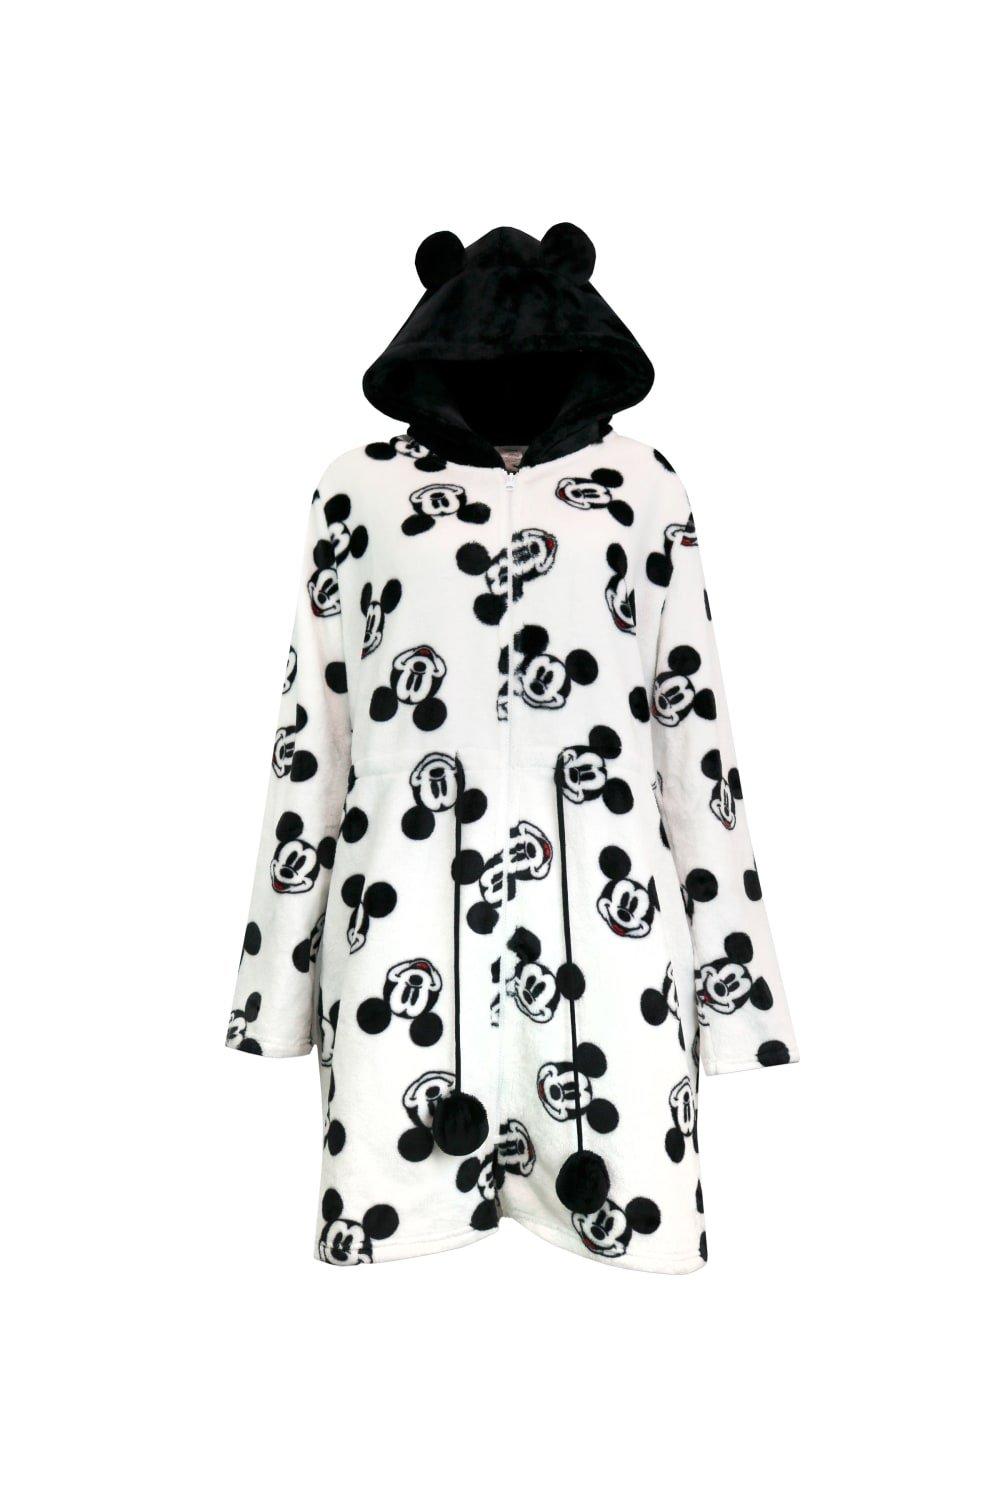 Mickey Mouse Dressing Gown